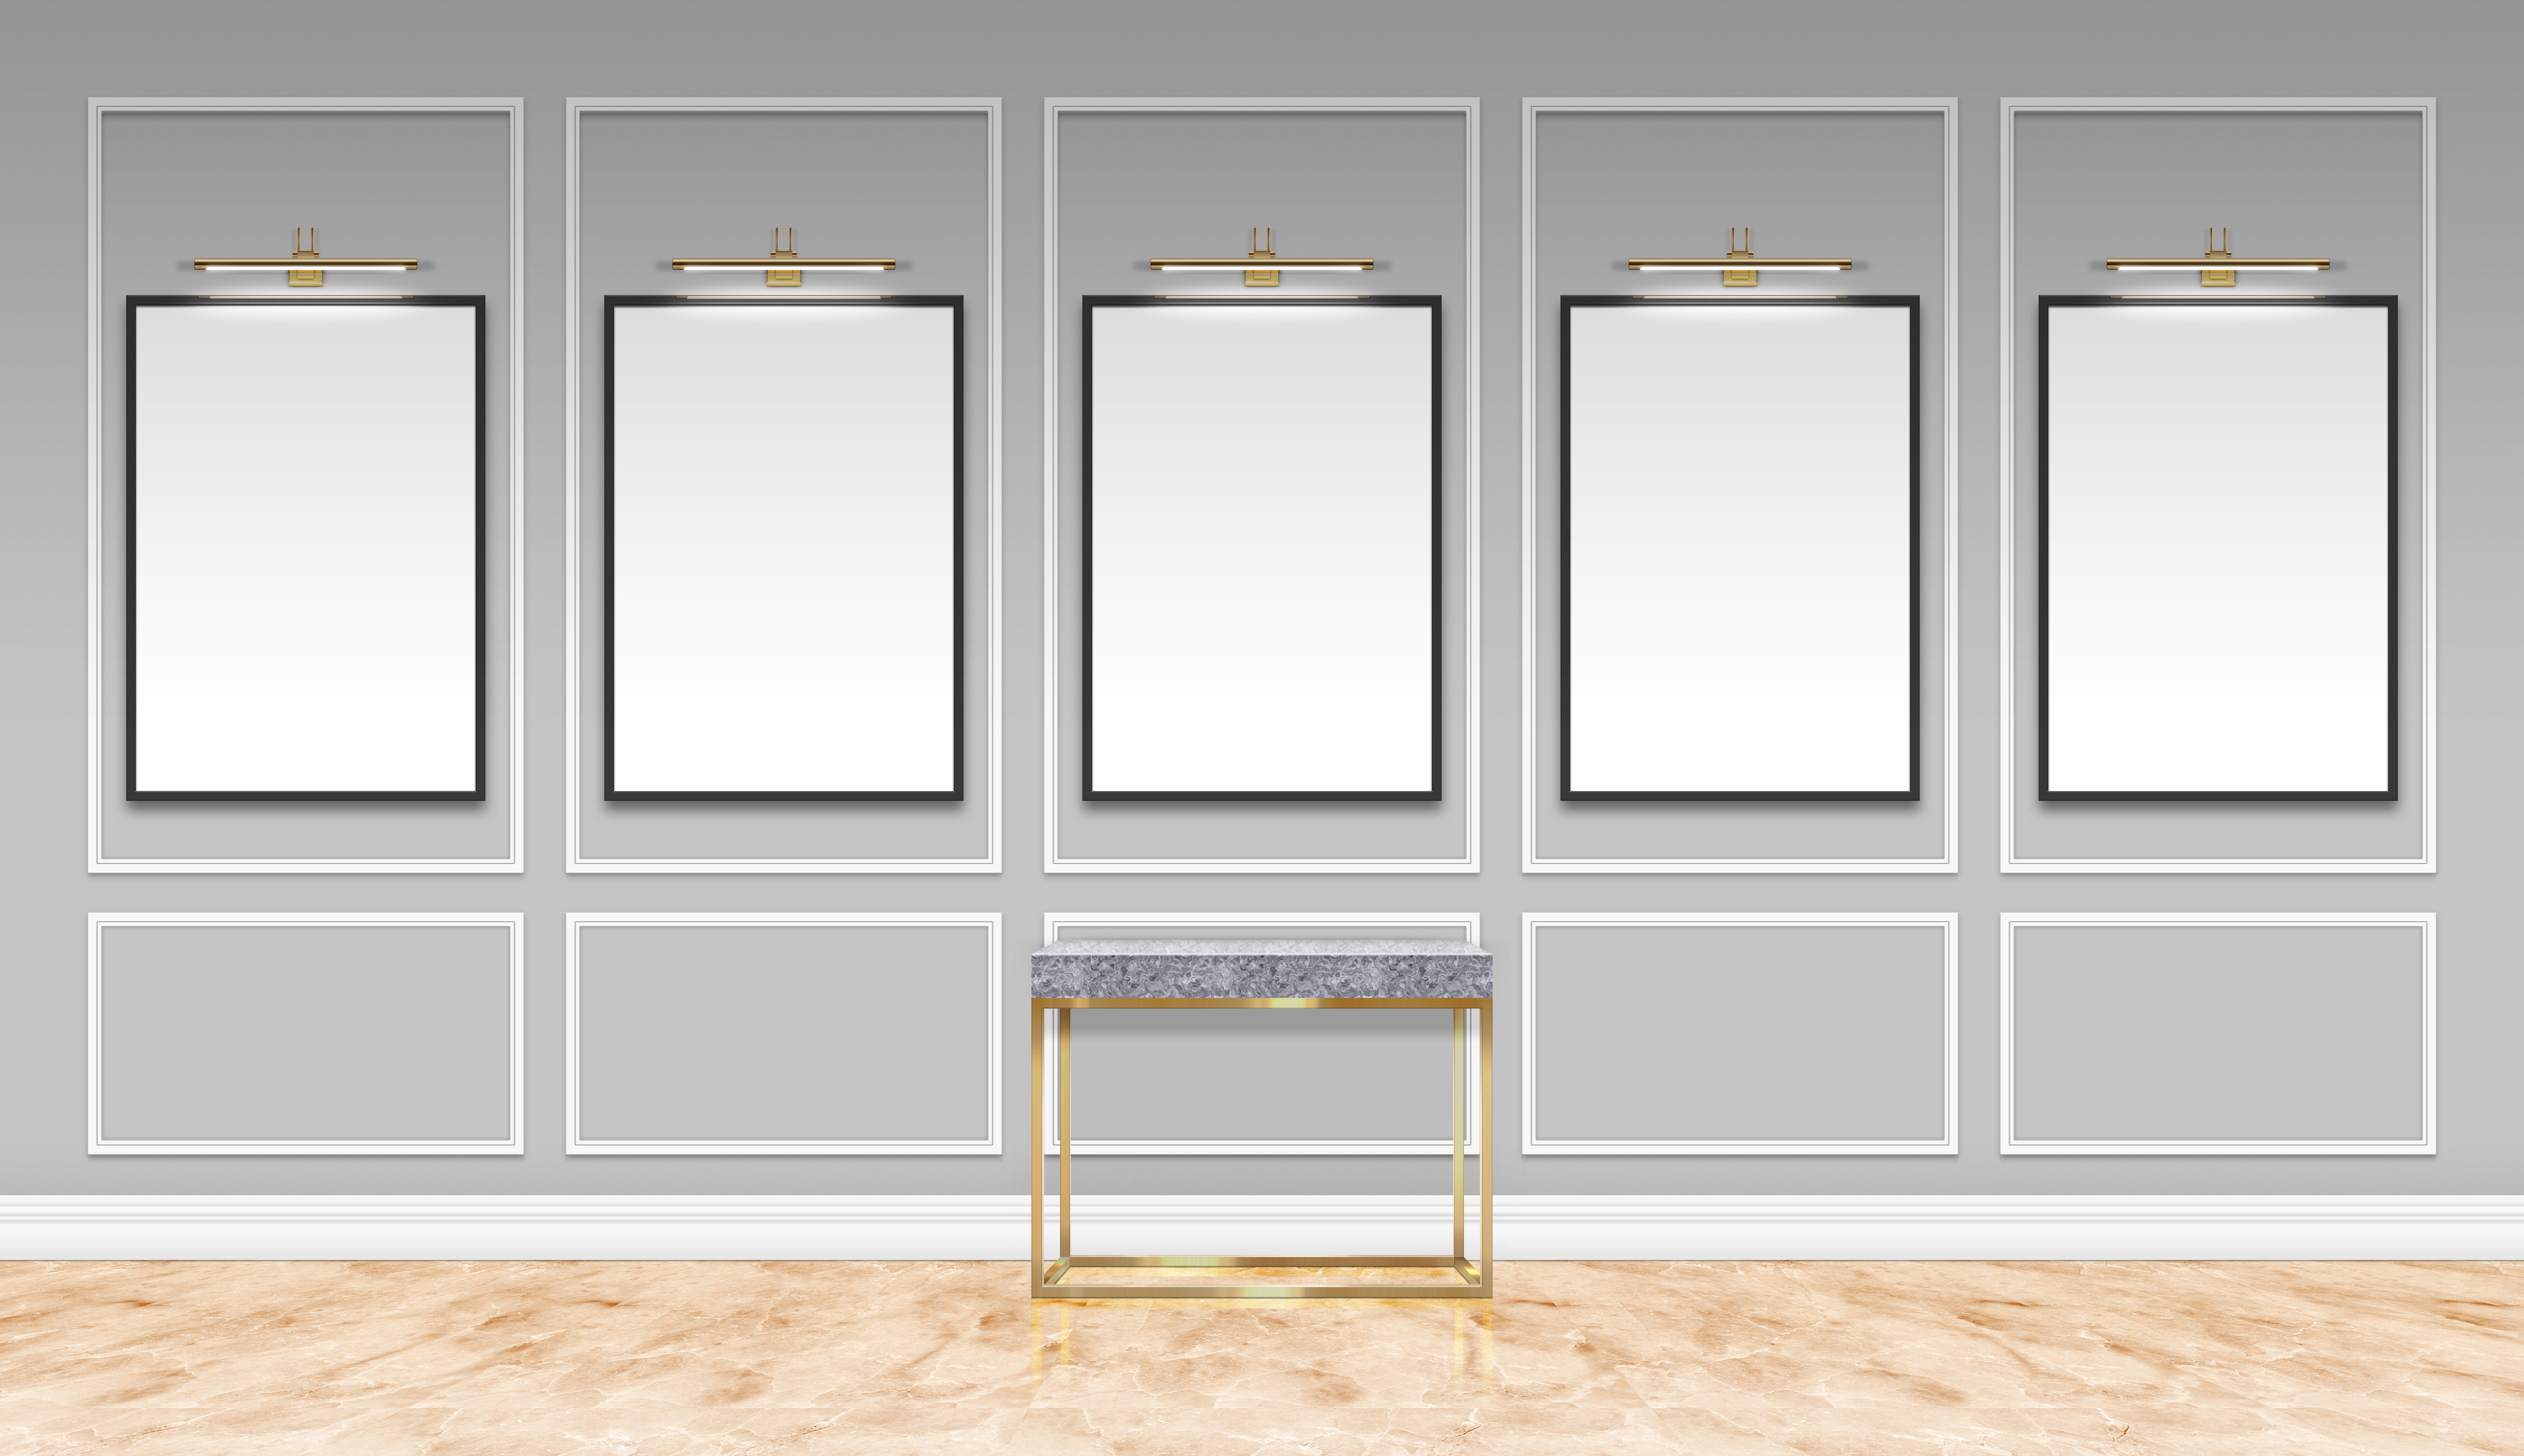 General 5200x3000 studio wall galleries picture frames minimalism simple background